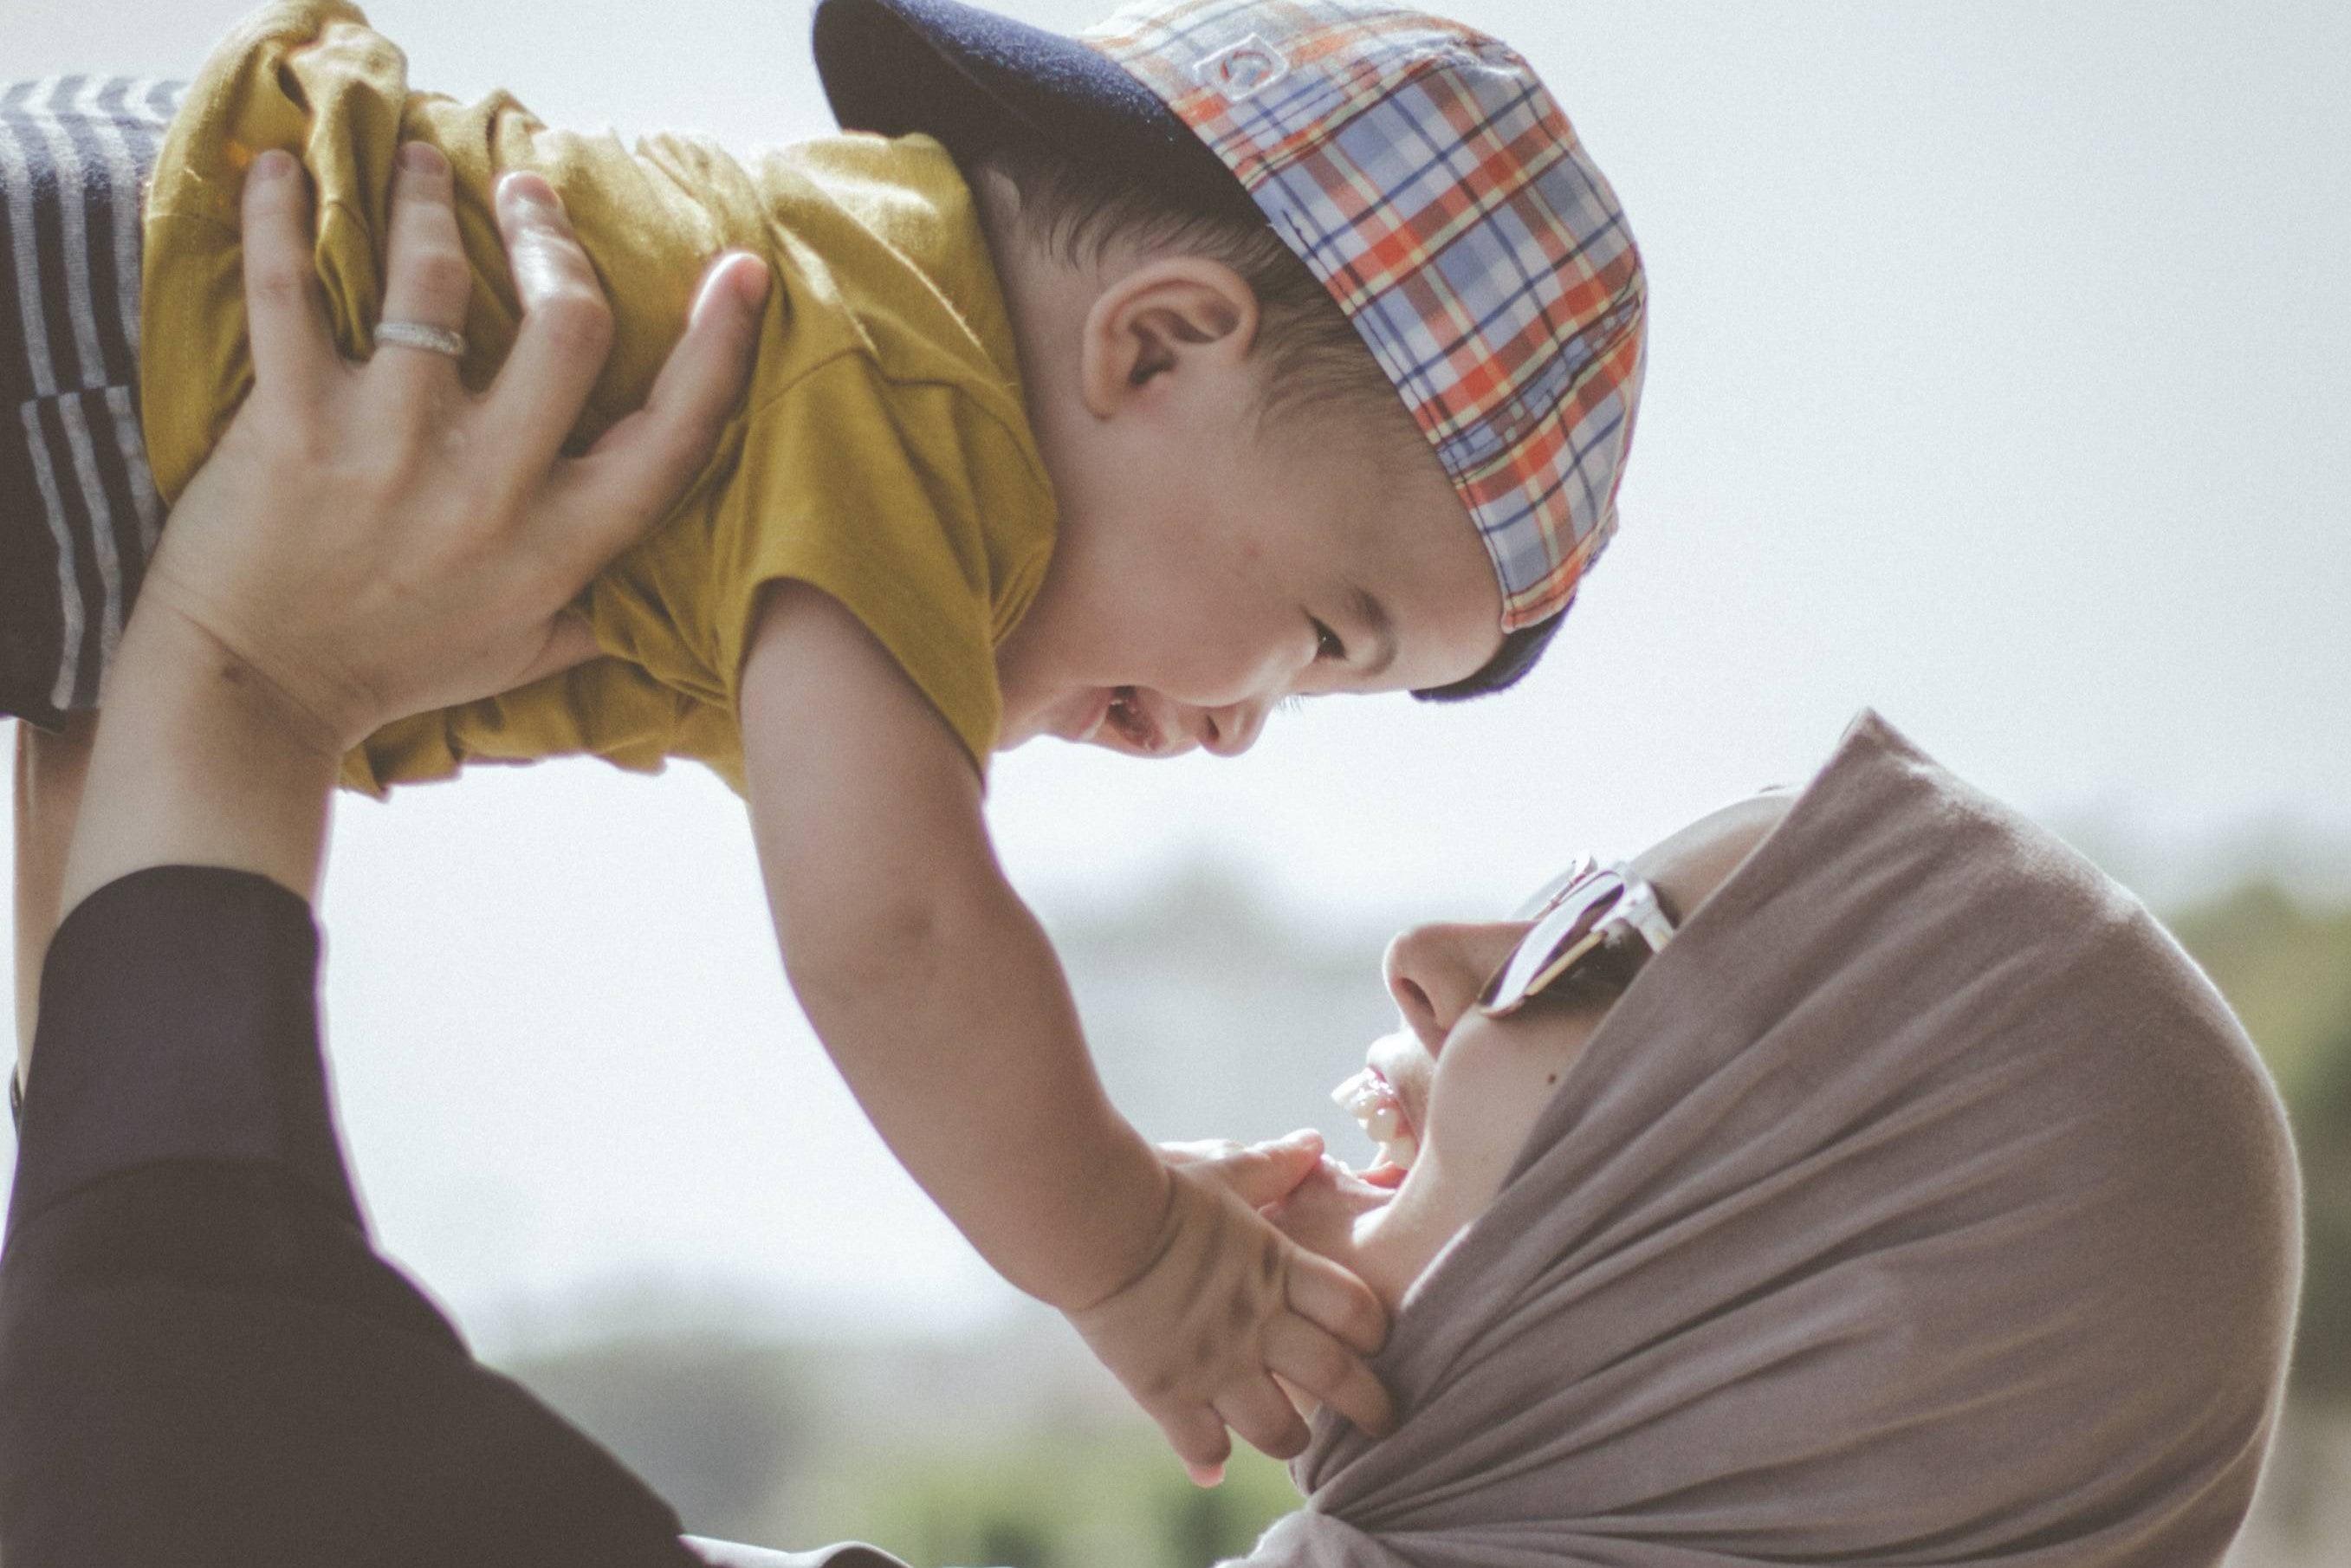 A first-time mummy's guide to fasting and breastfeeding during Ramadan - Hegen